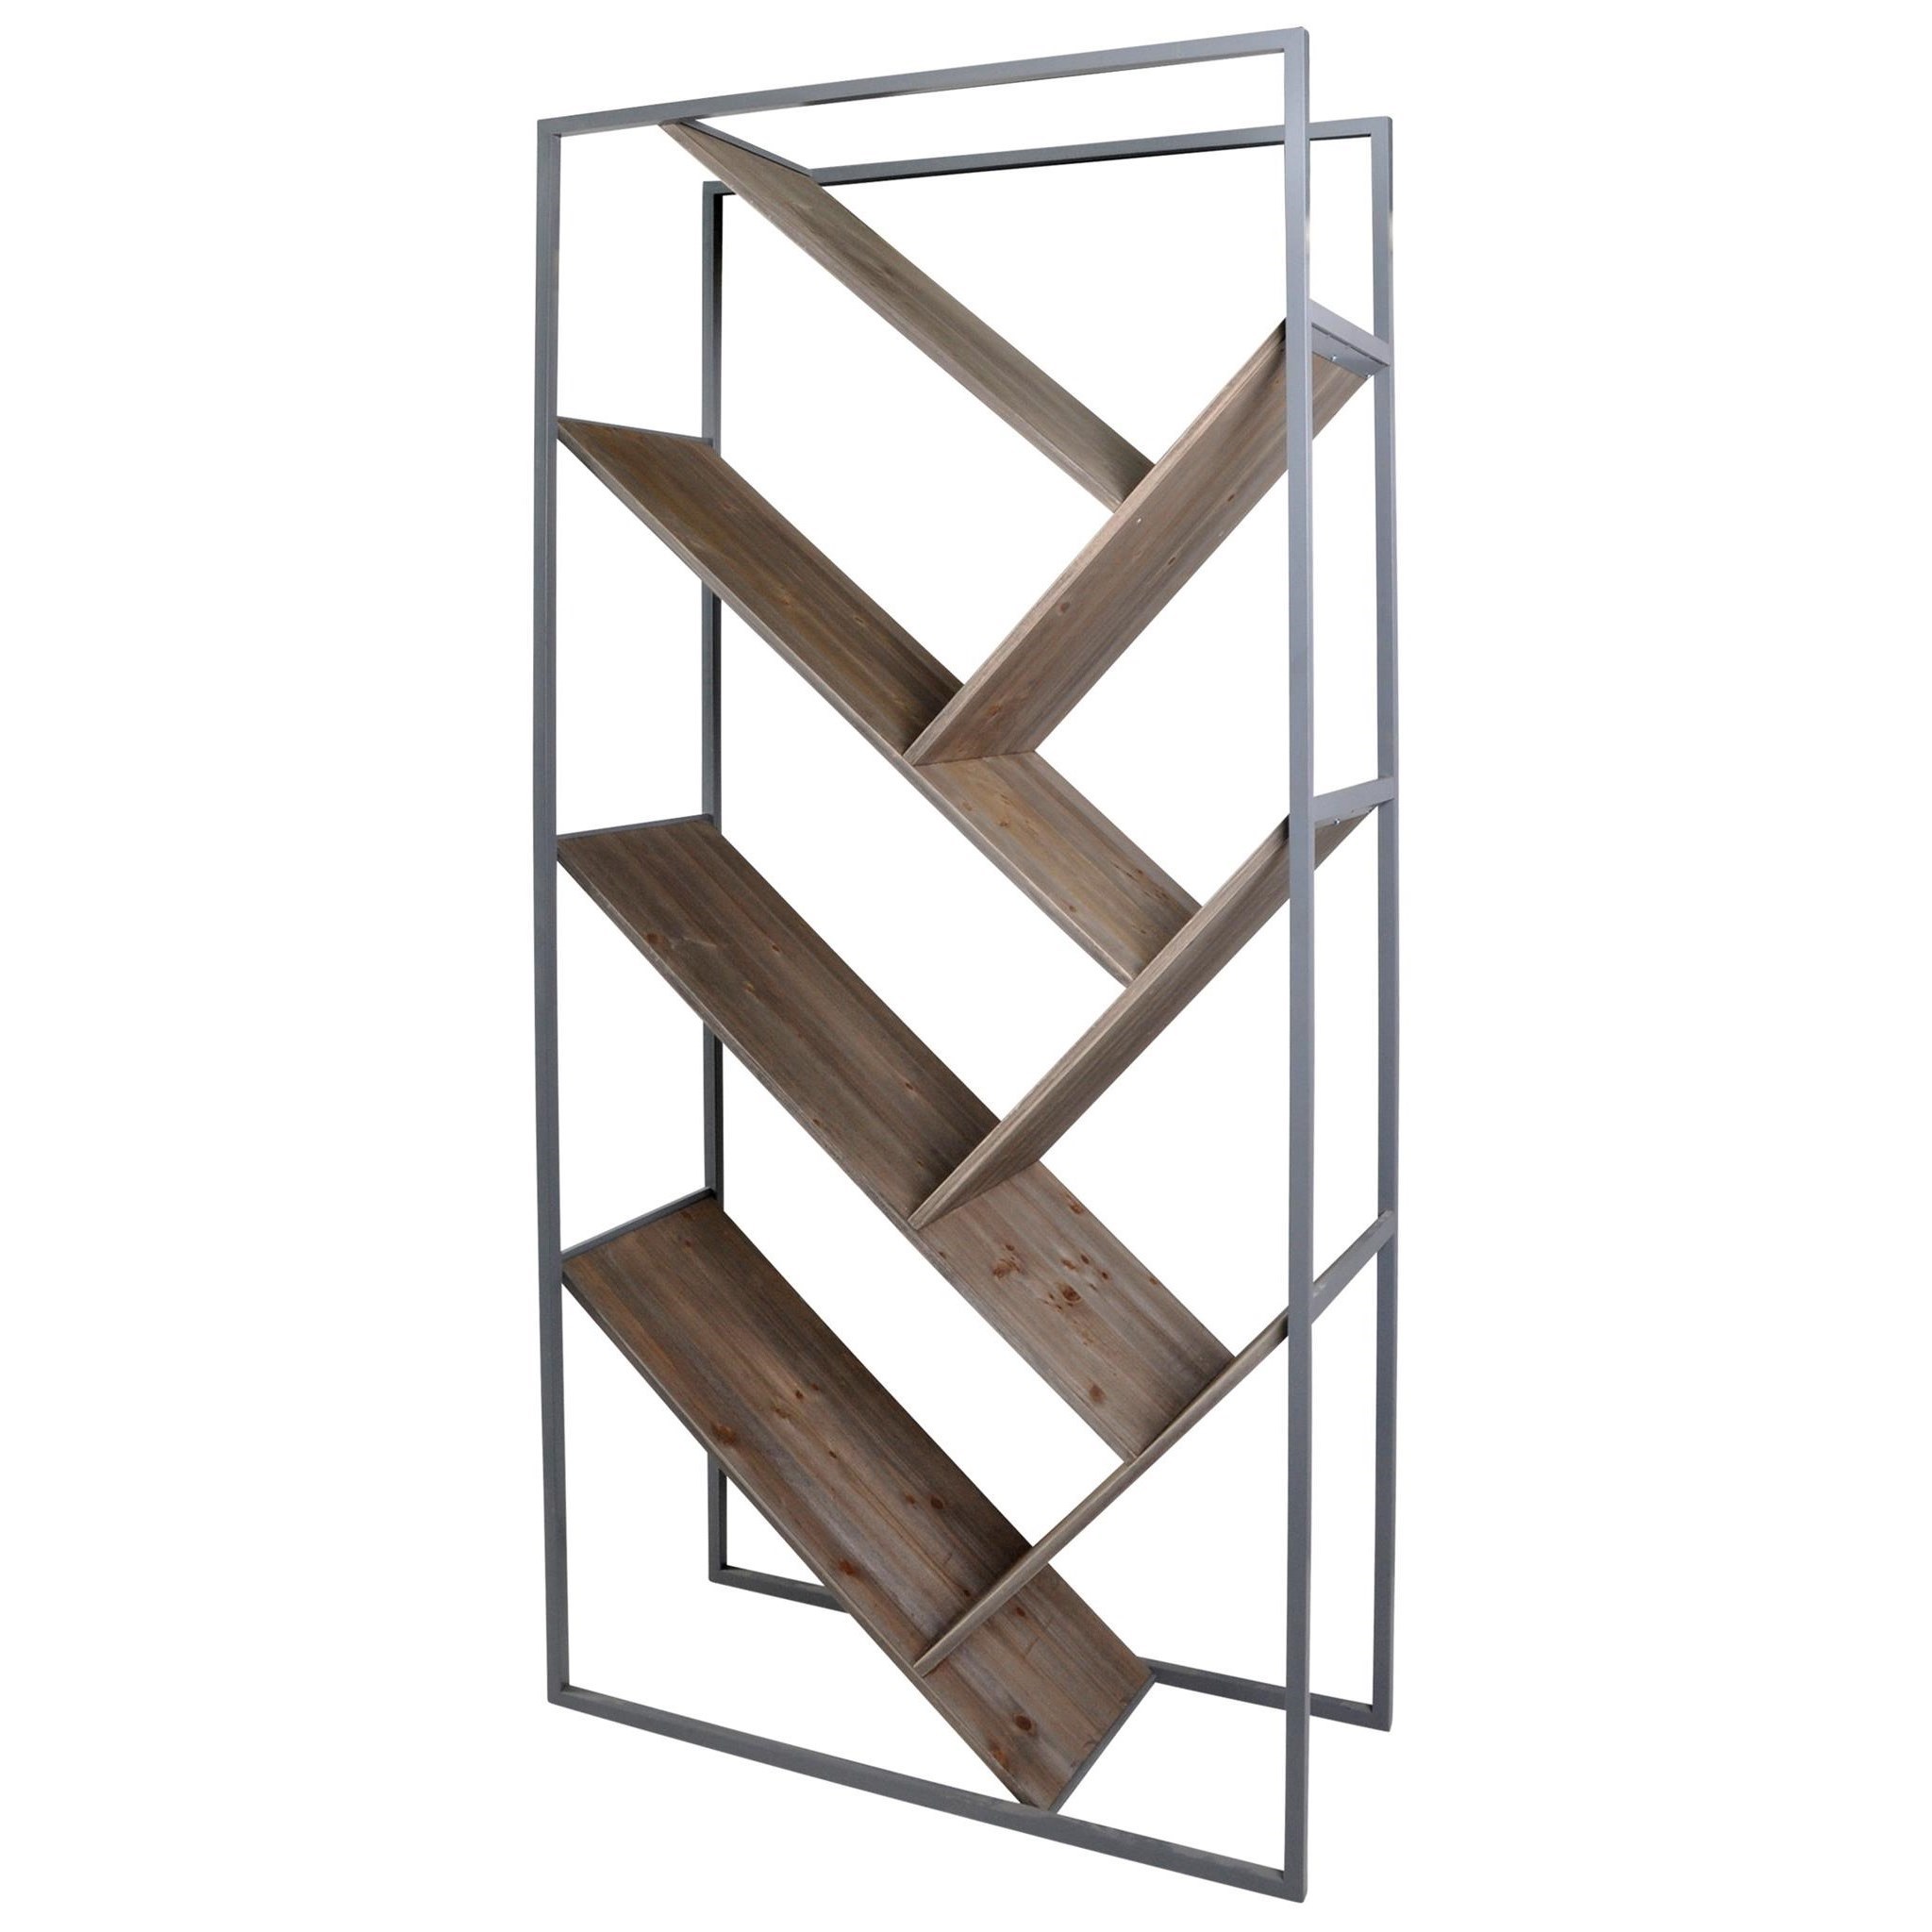 Industrial Gray Bryan Keith Bookcase with Intersecting Shelves